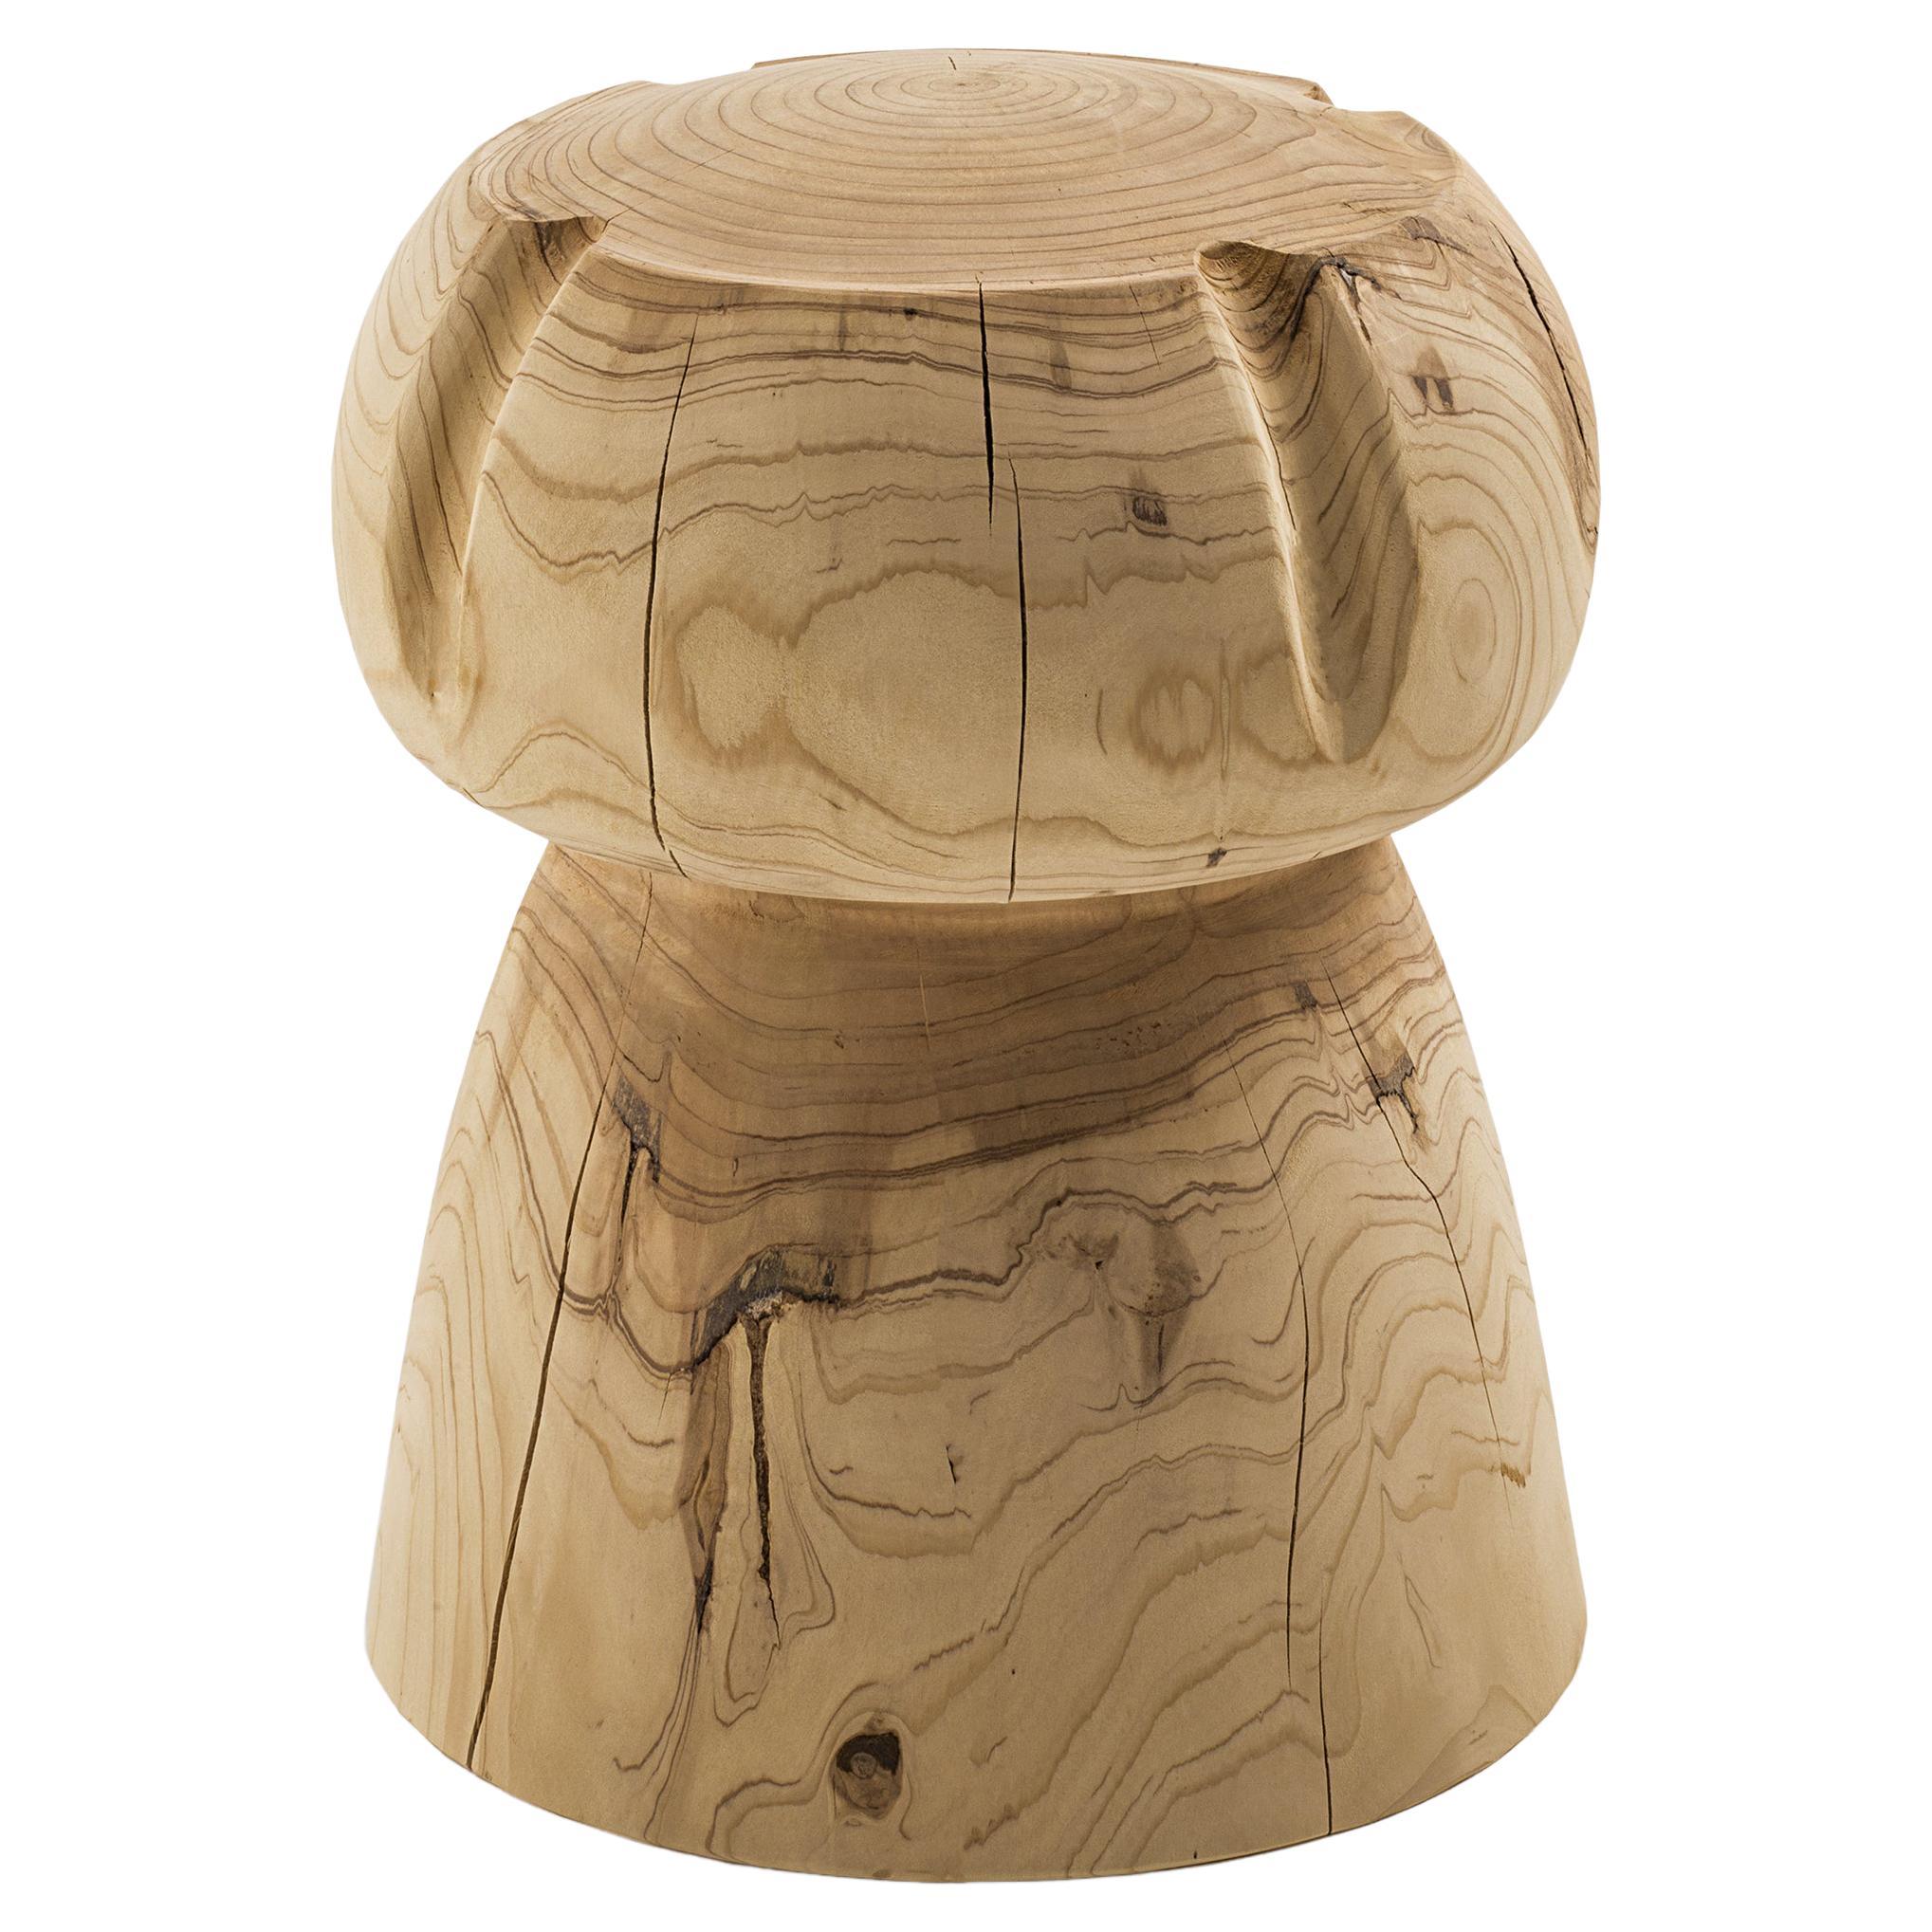 Miss Champagne Stool Isabelle Rigal Contemporary Natural Cedar Made in Italy Riv For Sale